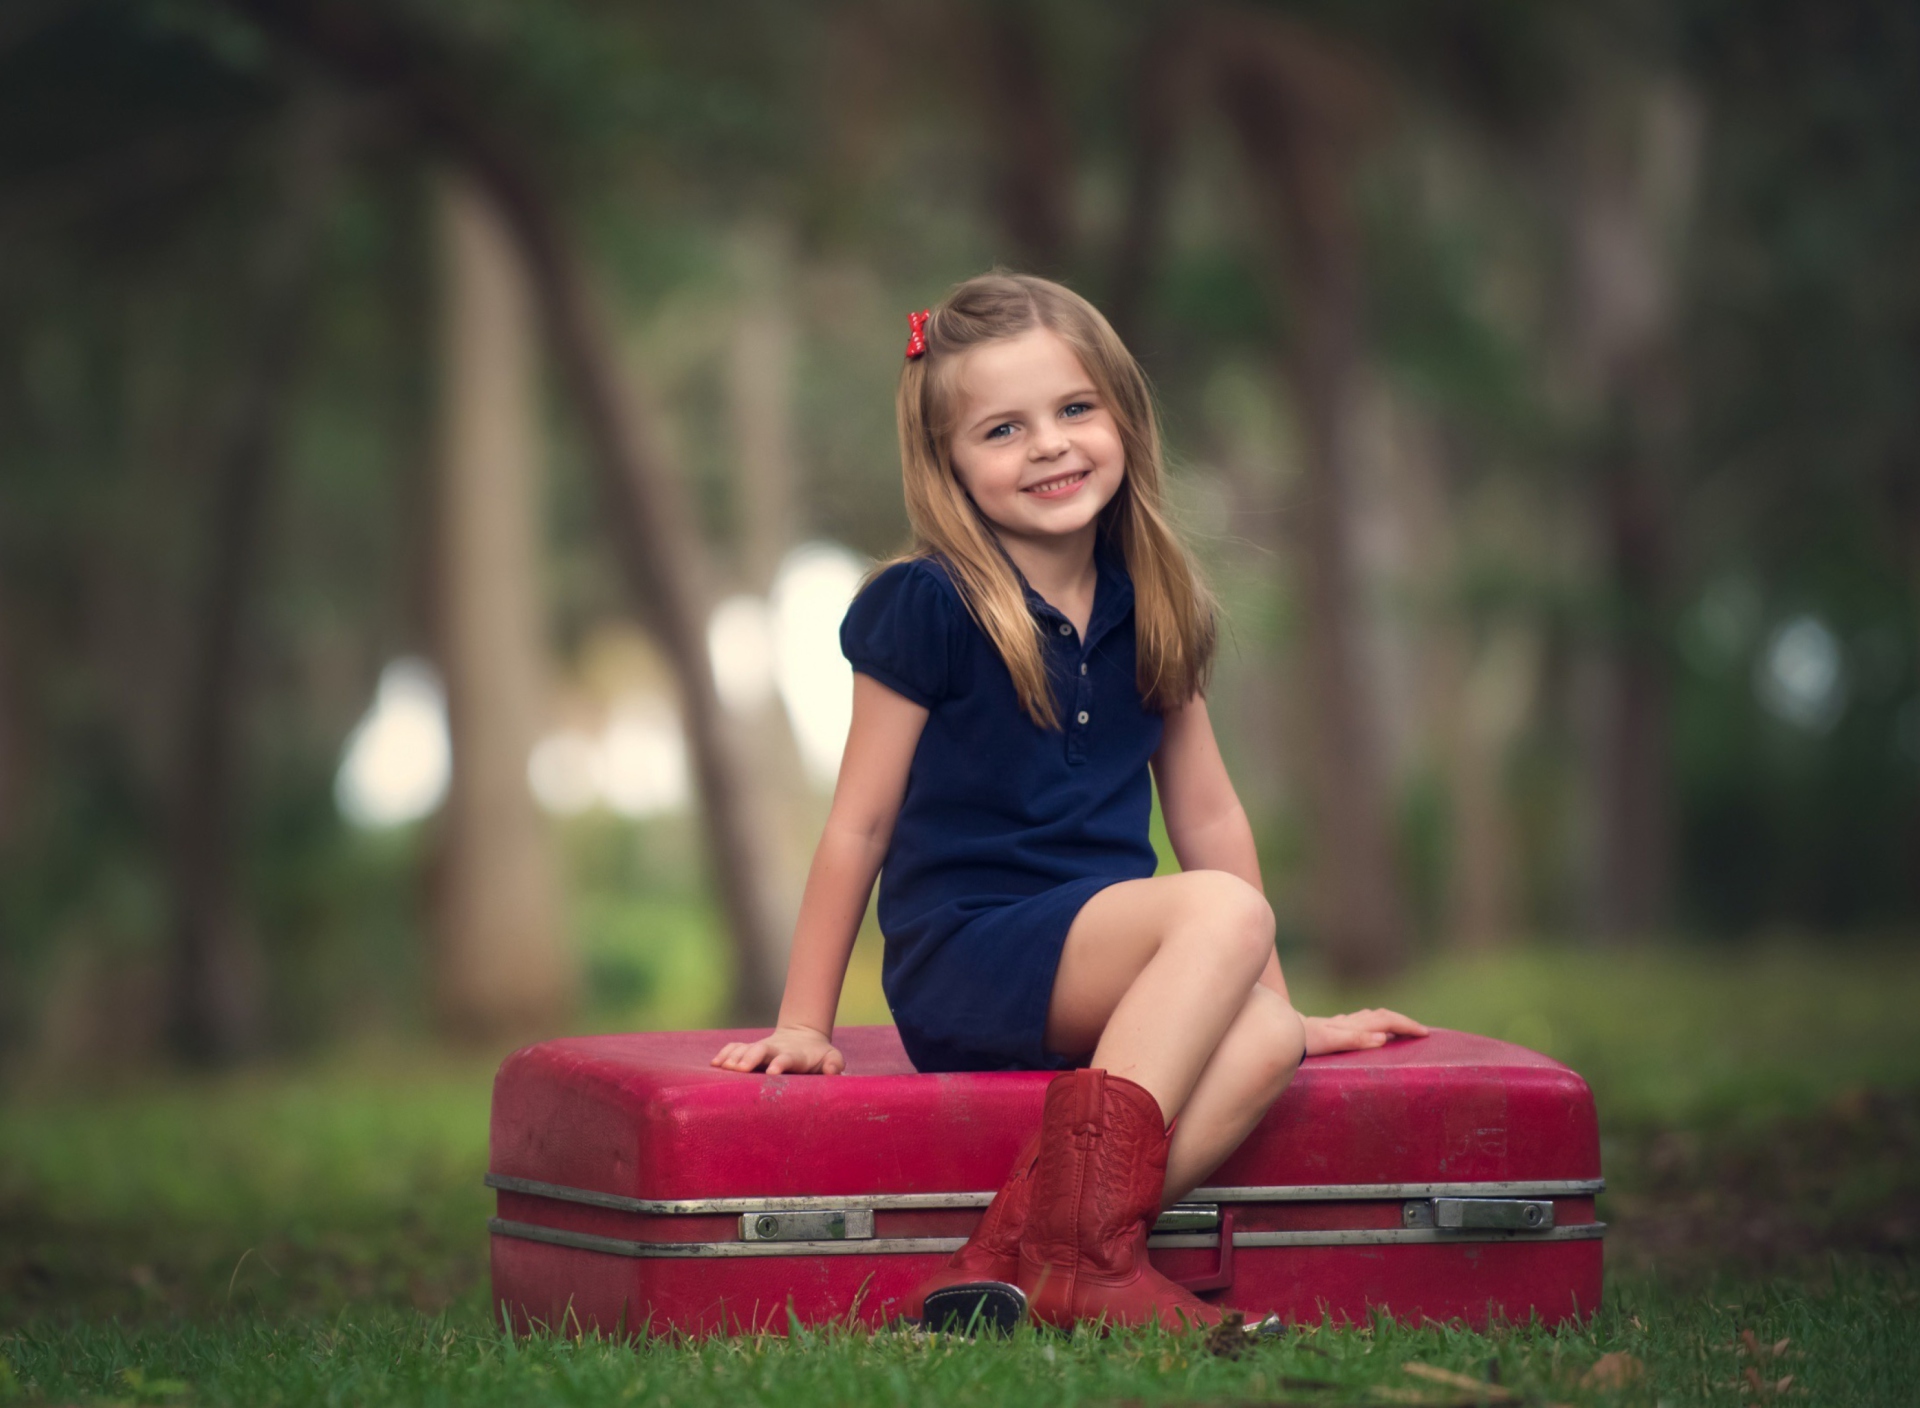 Обои Little Girl Sitting On Red Suitcase 1920x1408